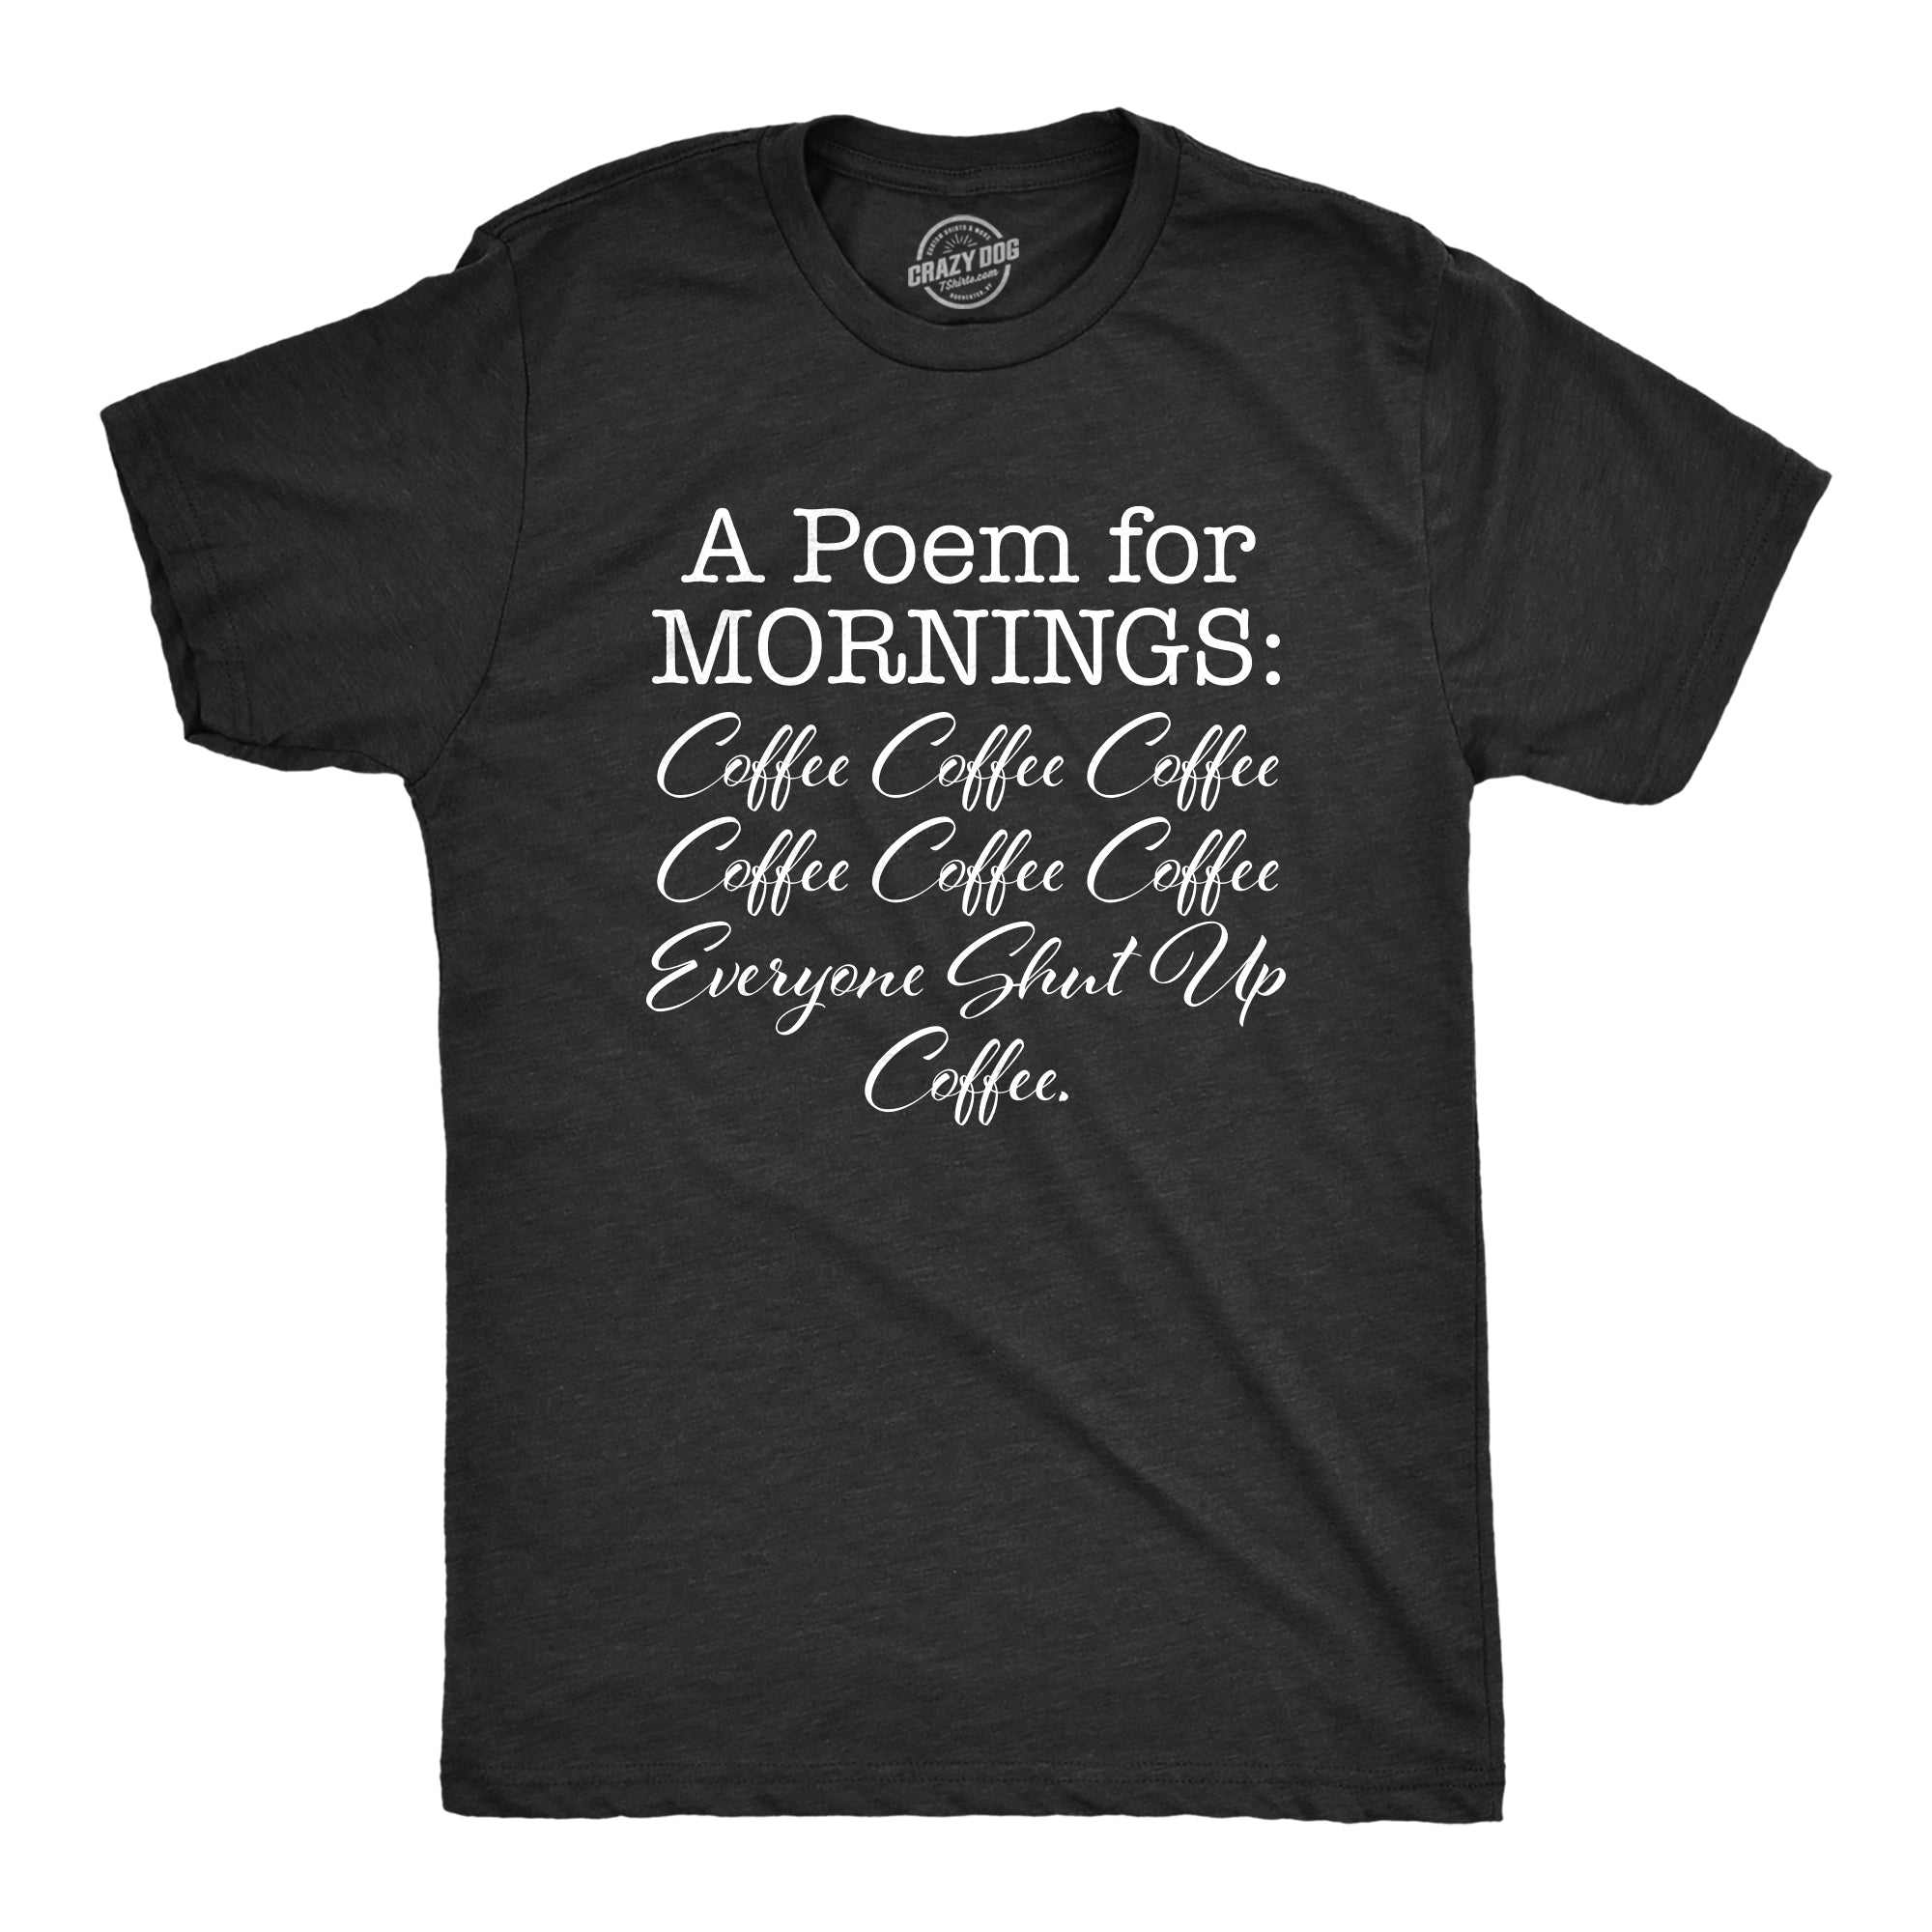 Funny Heather Black A Poem For Mornings Mens T Shirt Nerdy Coffee Tee